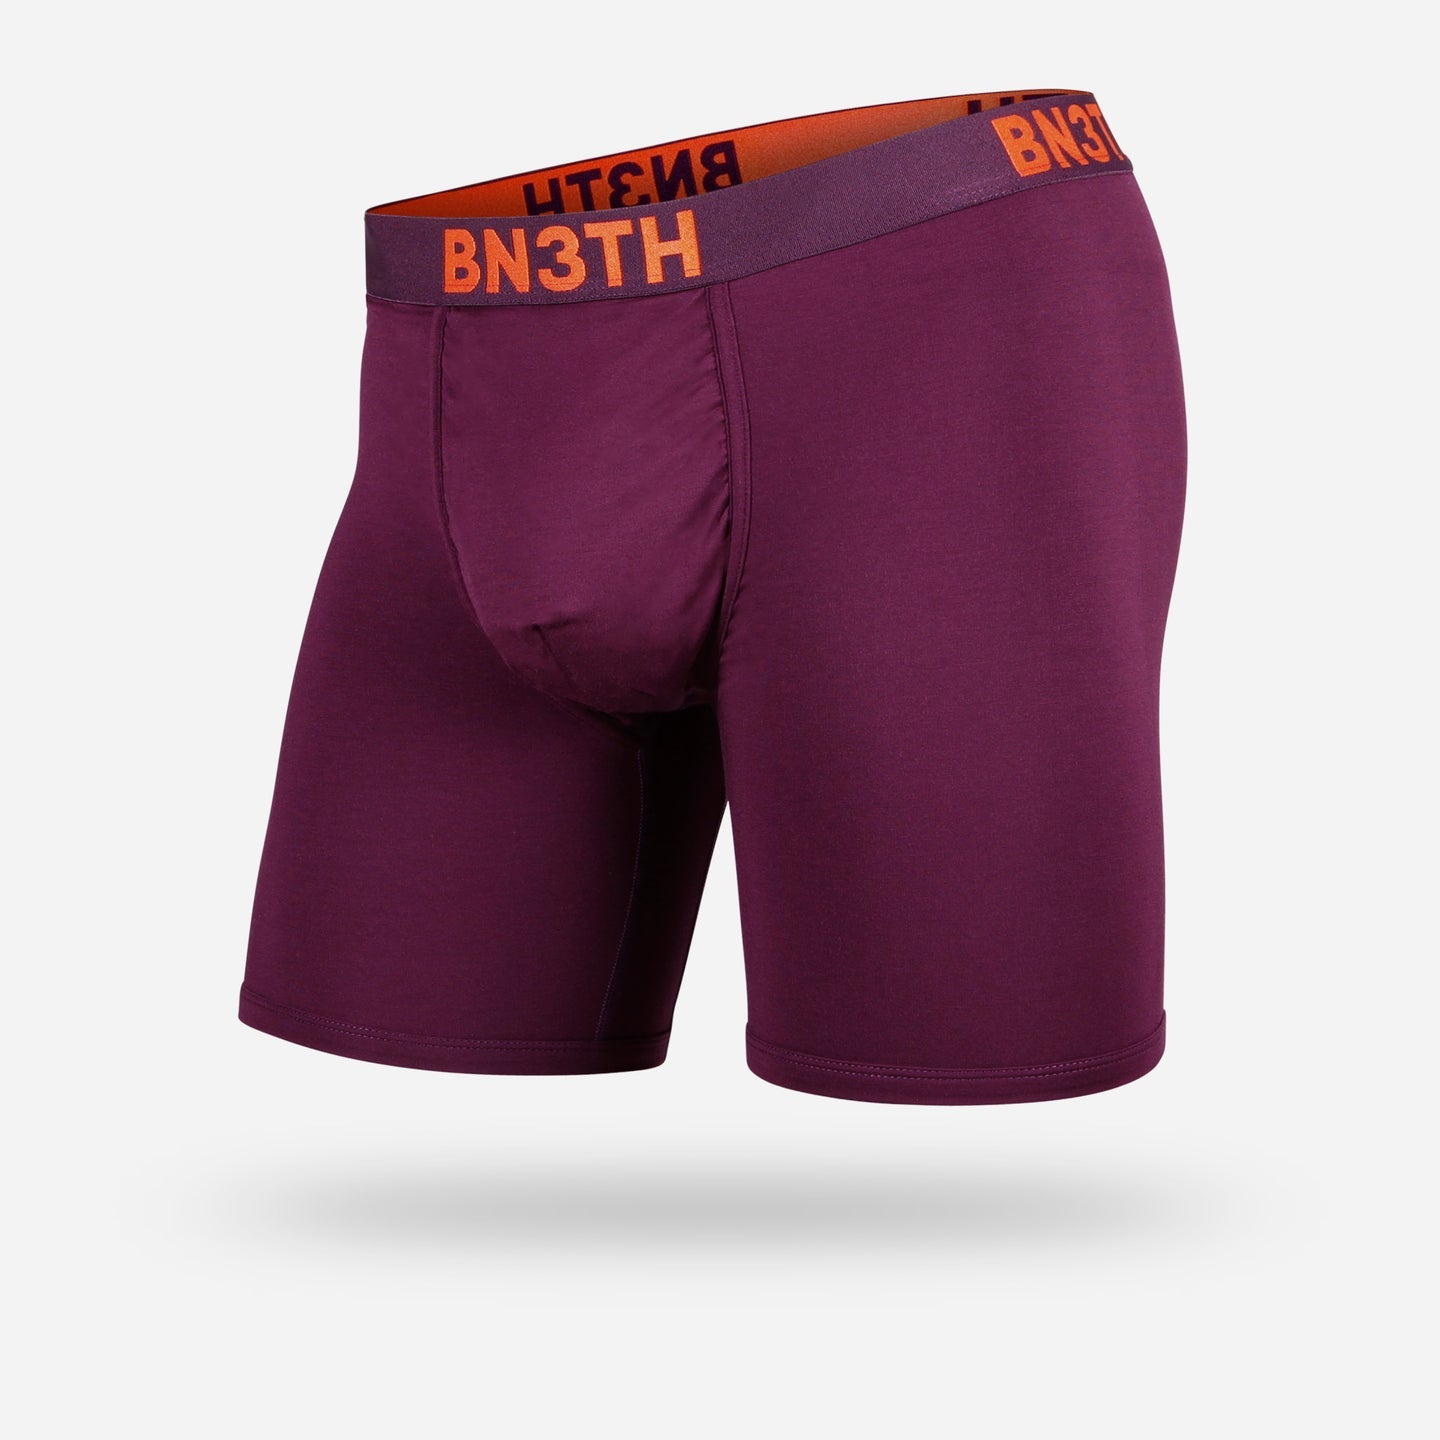 BN3TH Classic Boxer Brief - Breathable, Three-Dimensional MyPakage